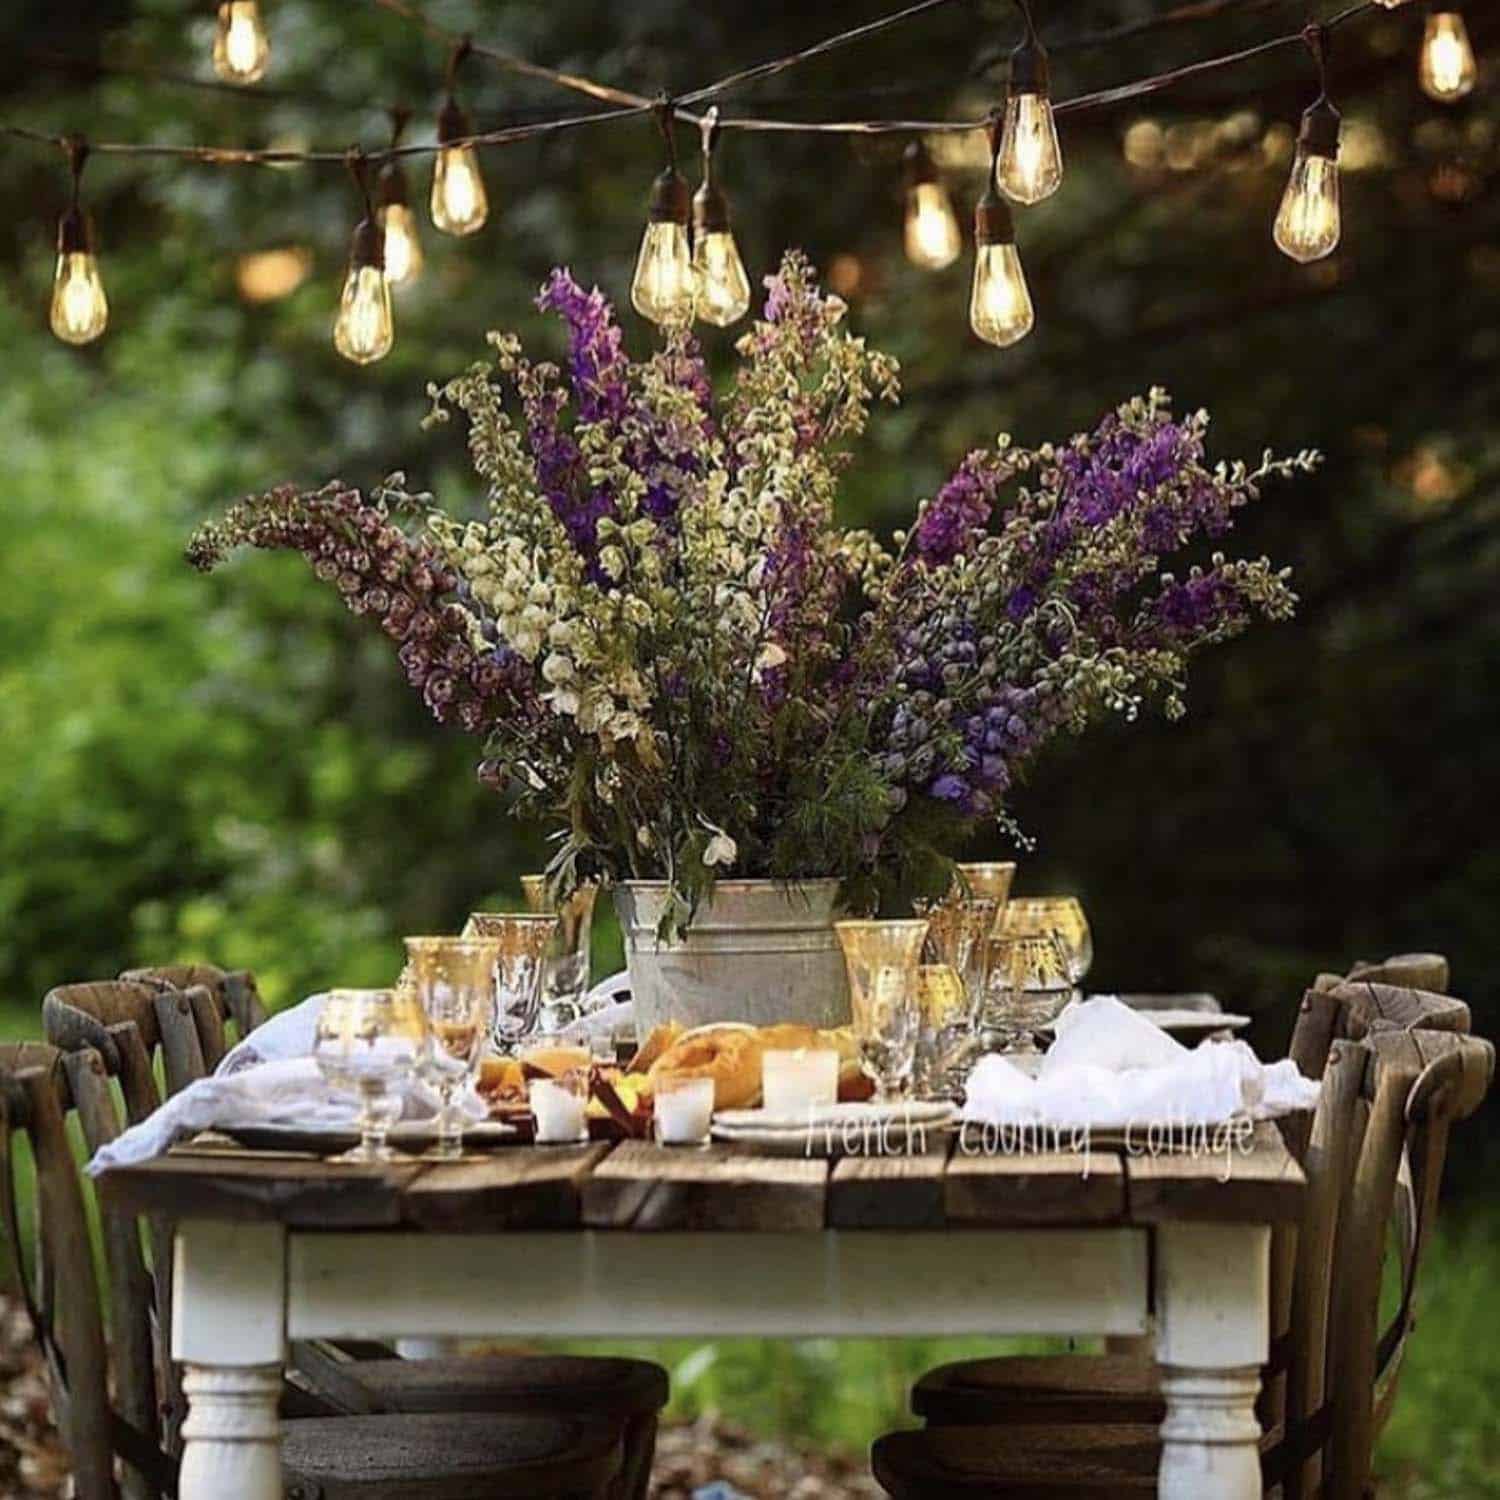 outdoor dining table with gardens and string lights